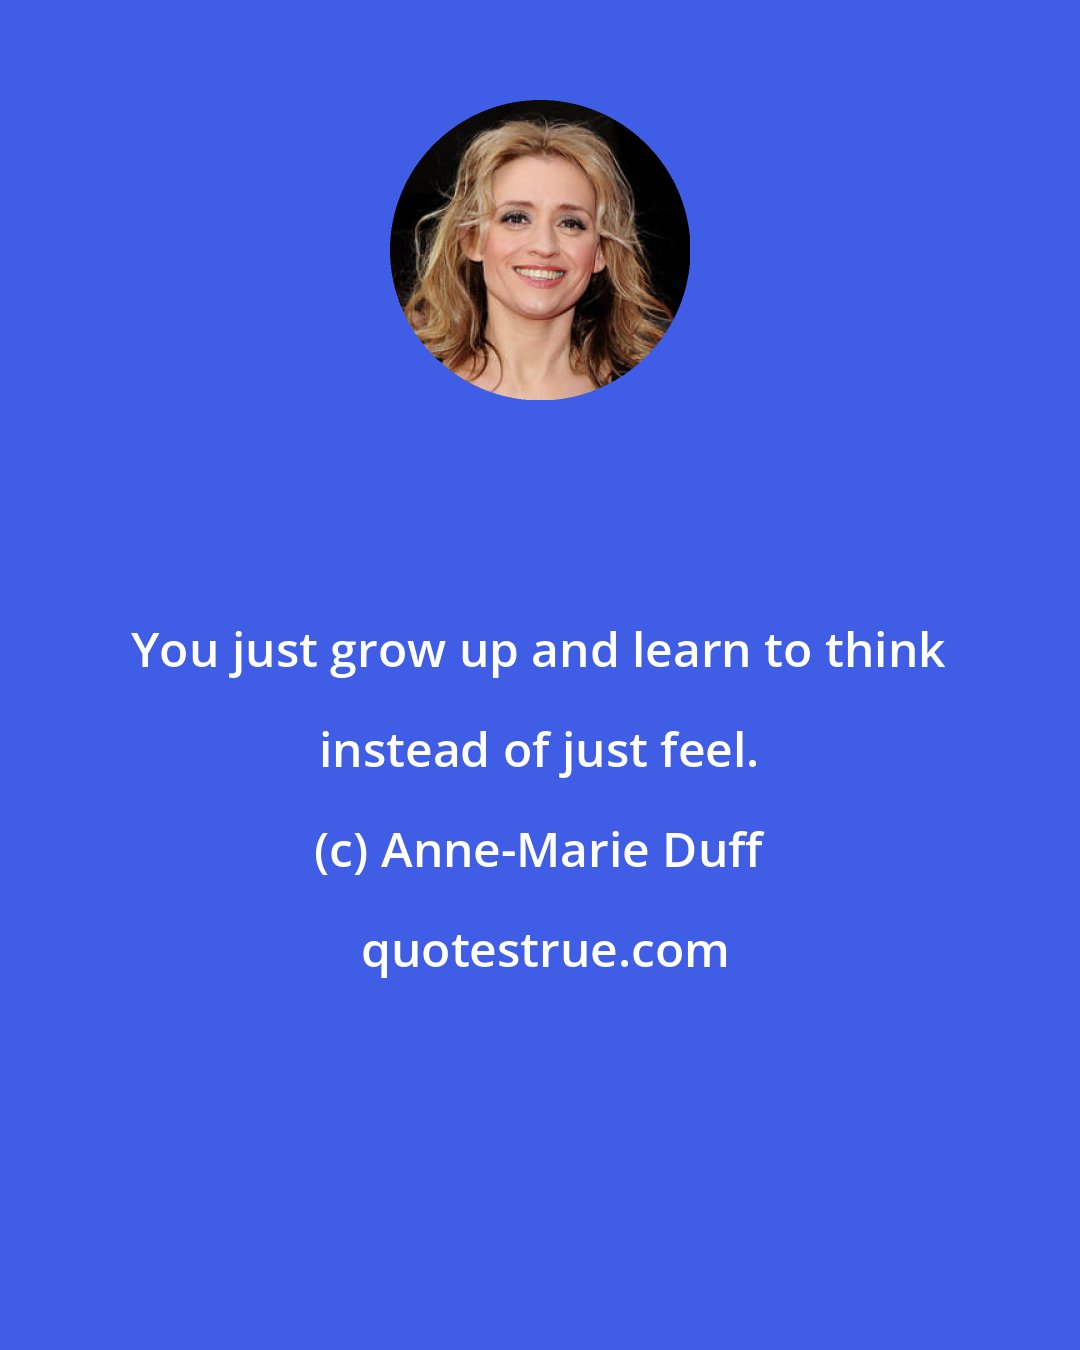 Anne-Marie Duff: You just grow up and learn to think instead of just feel.